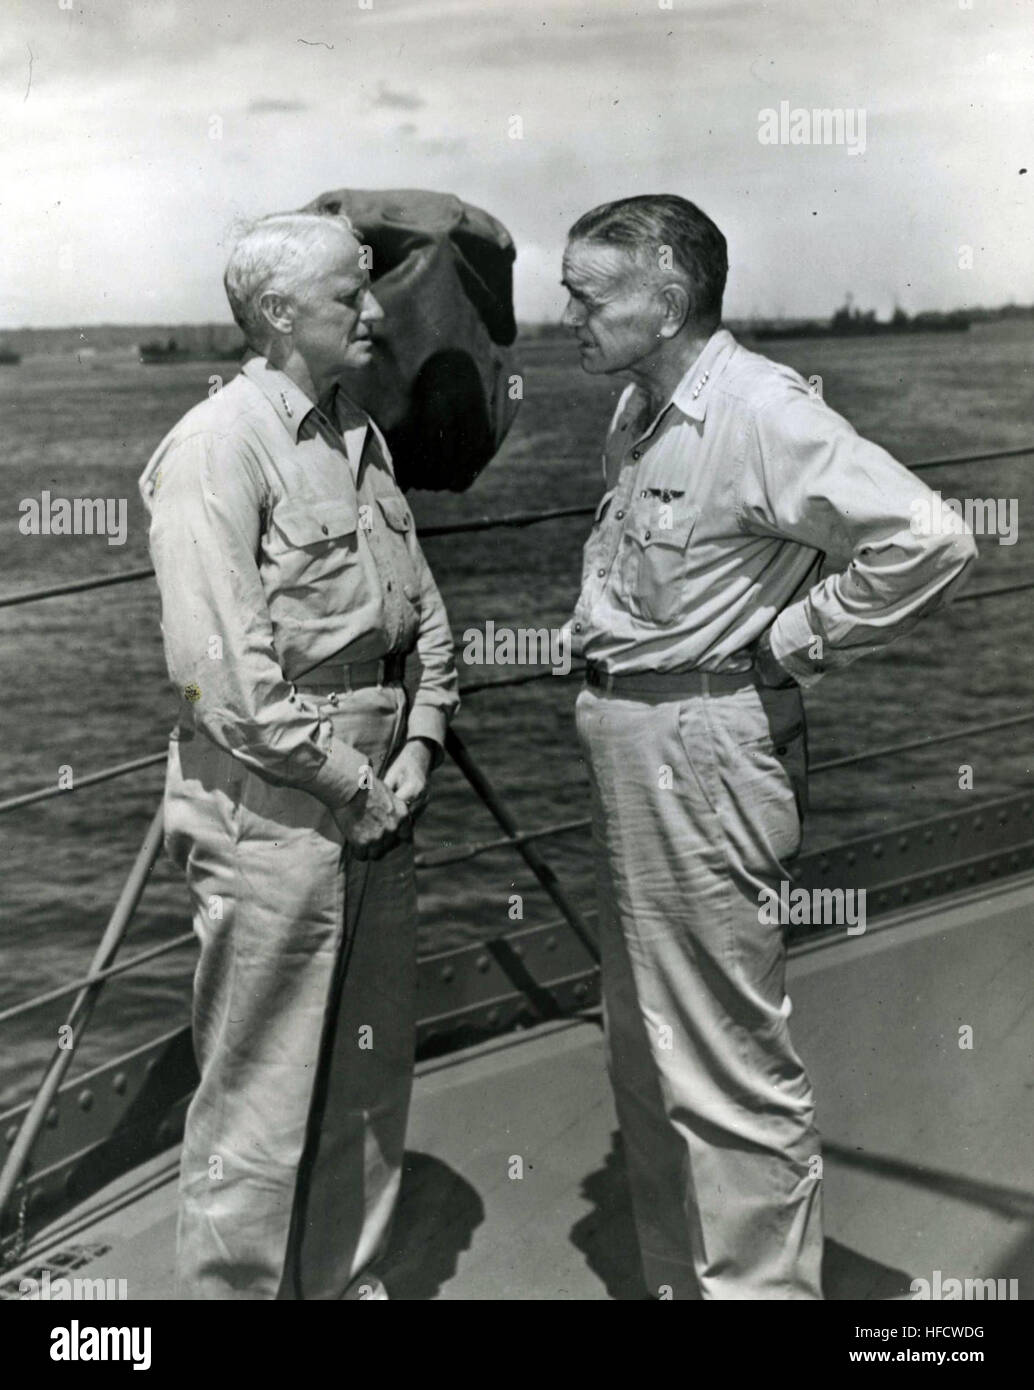 140219-N-ZZ999-101 Photo #: 80-G-34822 Admiral Chester W. Nimitz, USN, Commander in Chief Pacific and Pacific Ocean Areas (left), and Admiral William F. Halsey, USN, Commander, South Pacific Area and South Pacific Force, confer aboard USS Curtiss (AV-4) at 'Button' Naval Base, Espiritu Santo, New Hebrides, 20 January 1943. Official U.S. Navy Photograph Adm. Chester W. Nimitz and Adm. William F. Halsey 430120-N-ZZ999-101 Stock Photo